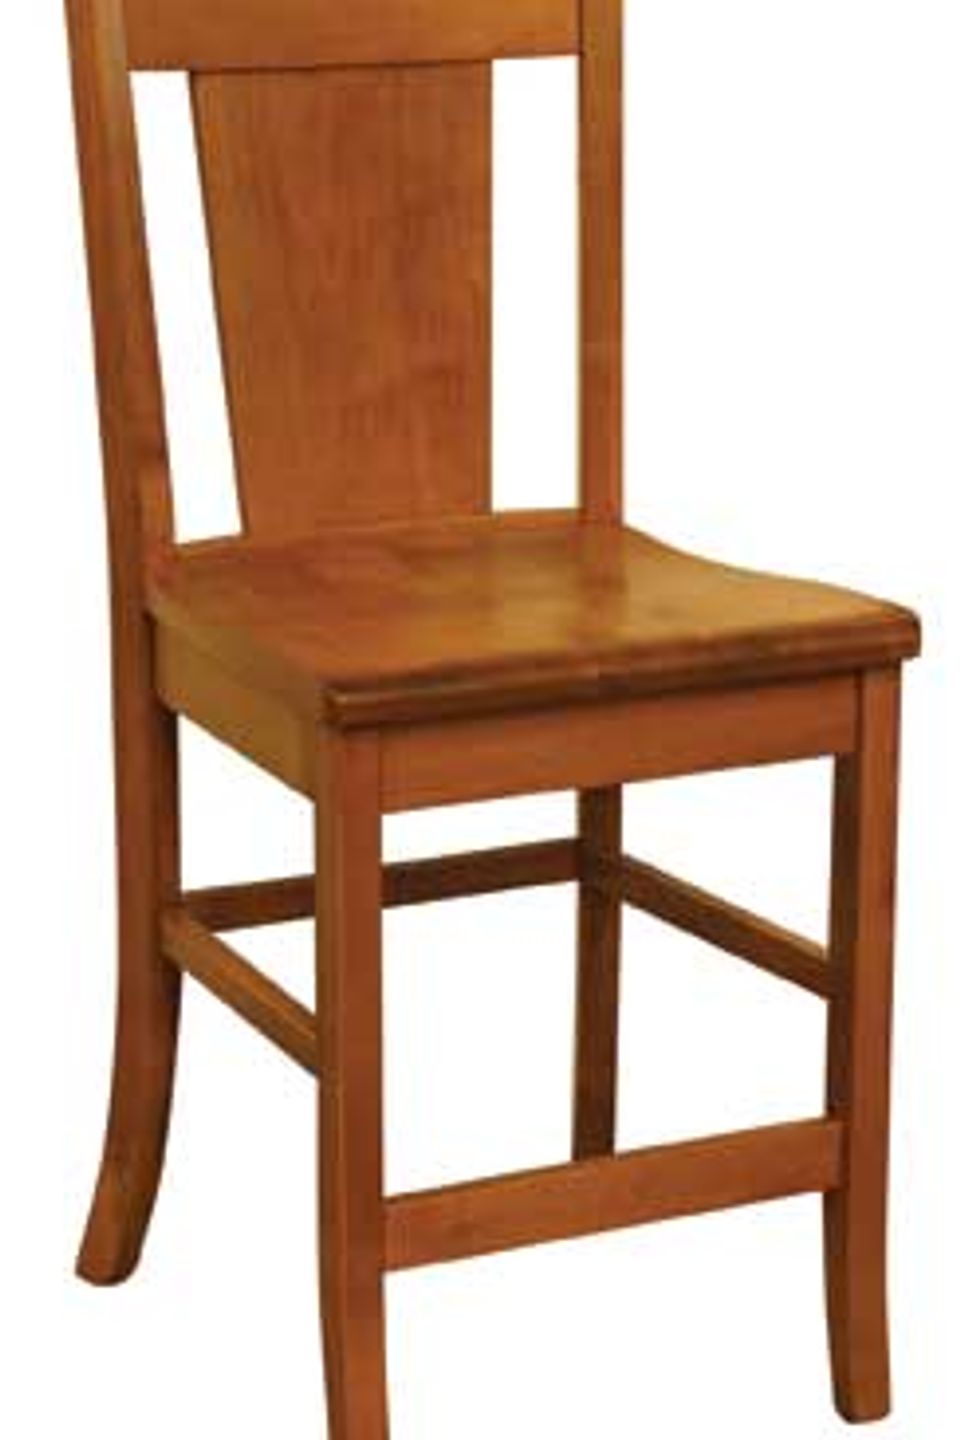 Wwc capemay barchair